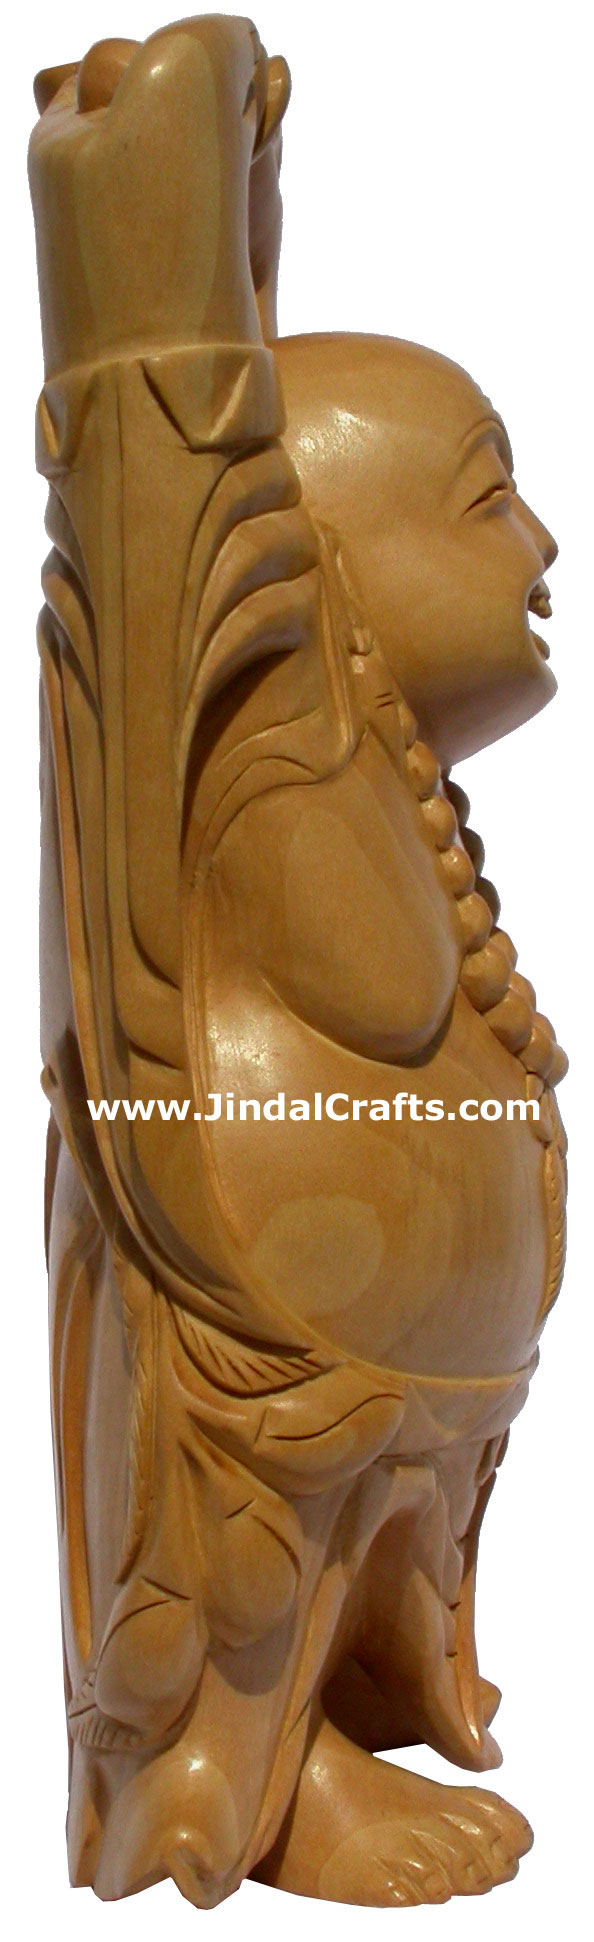 Master Piece - Handcarved Wooden Sculpture Happy Laughing Buddha Vaastu India